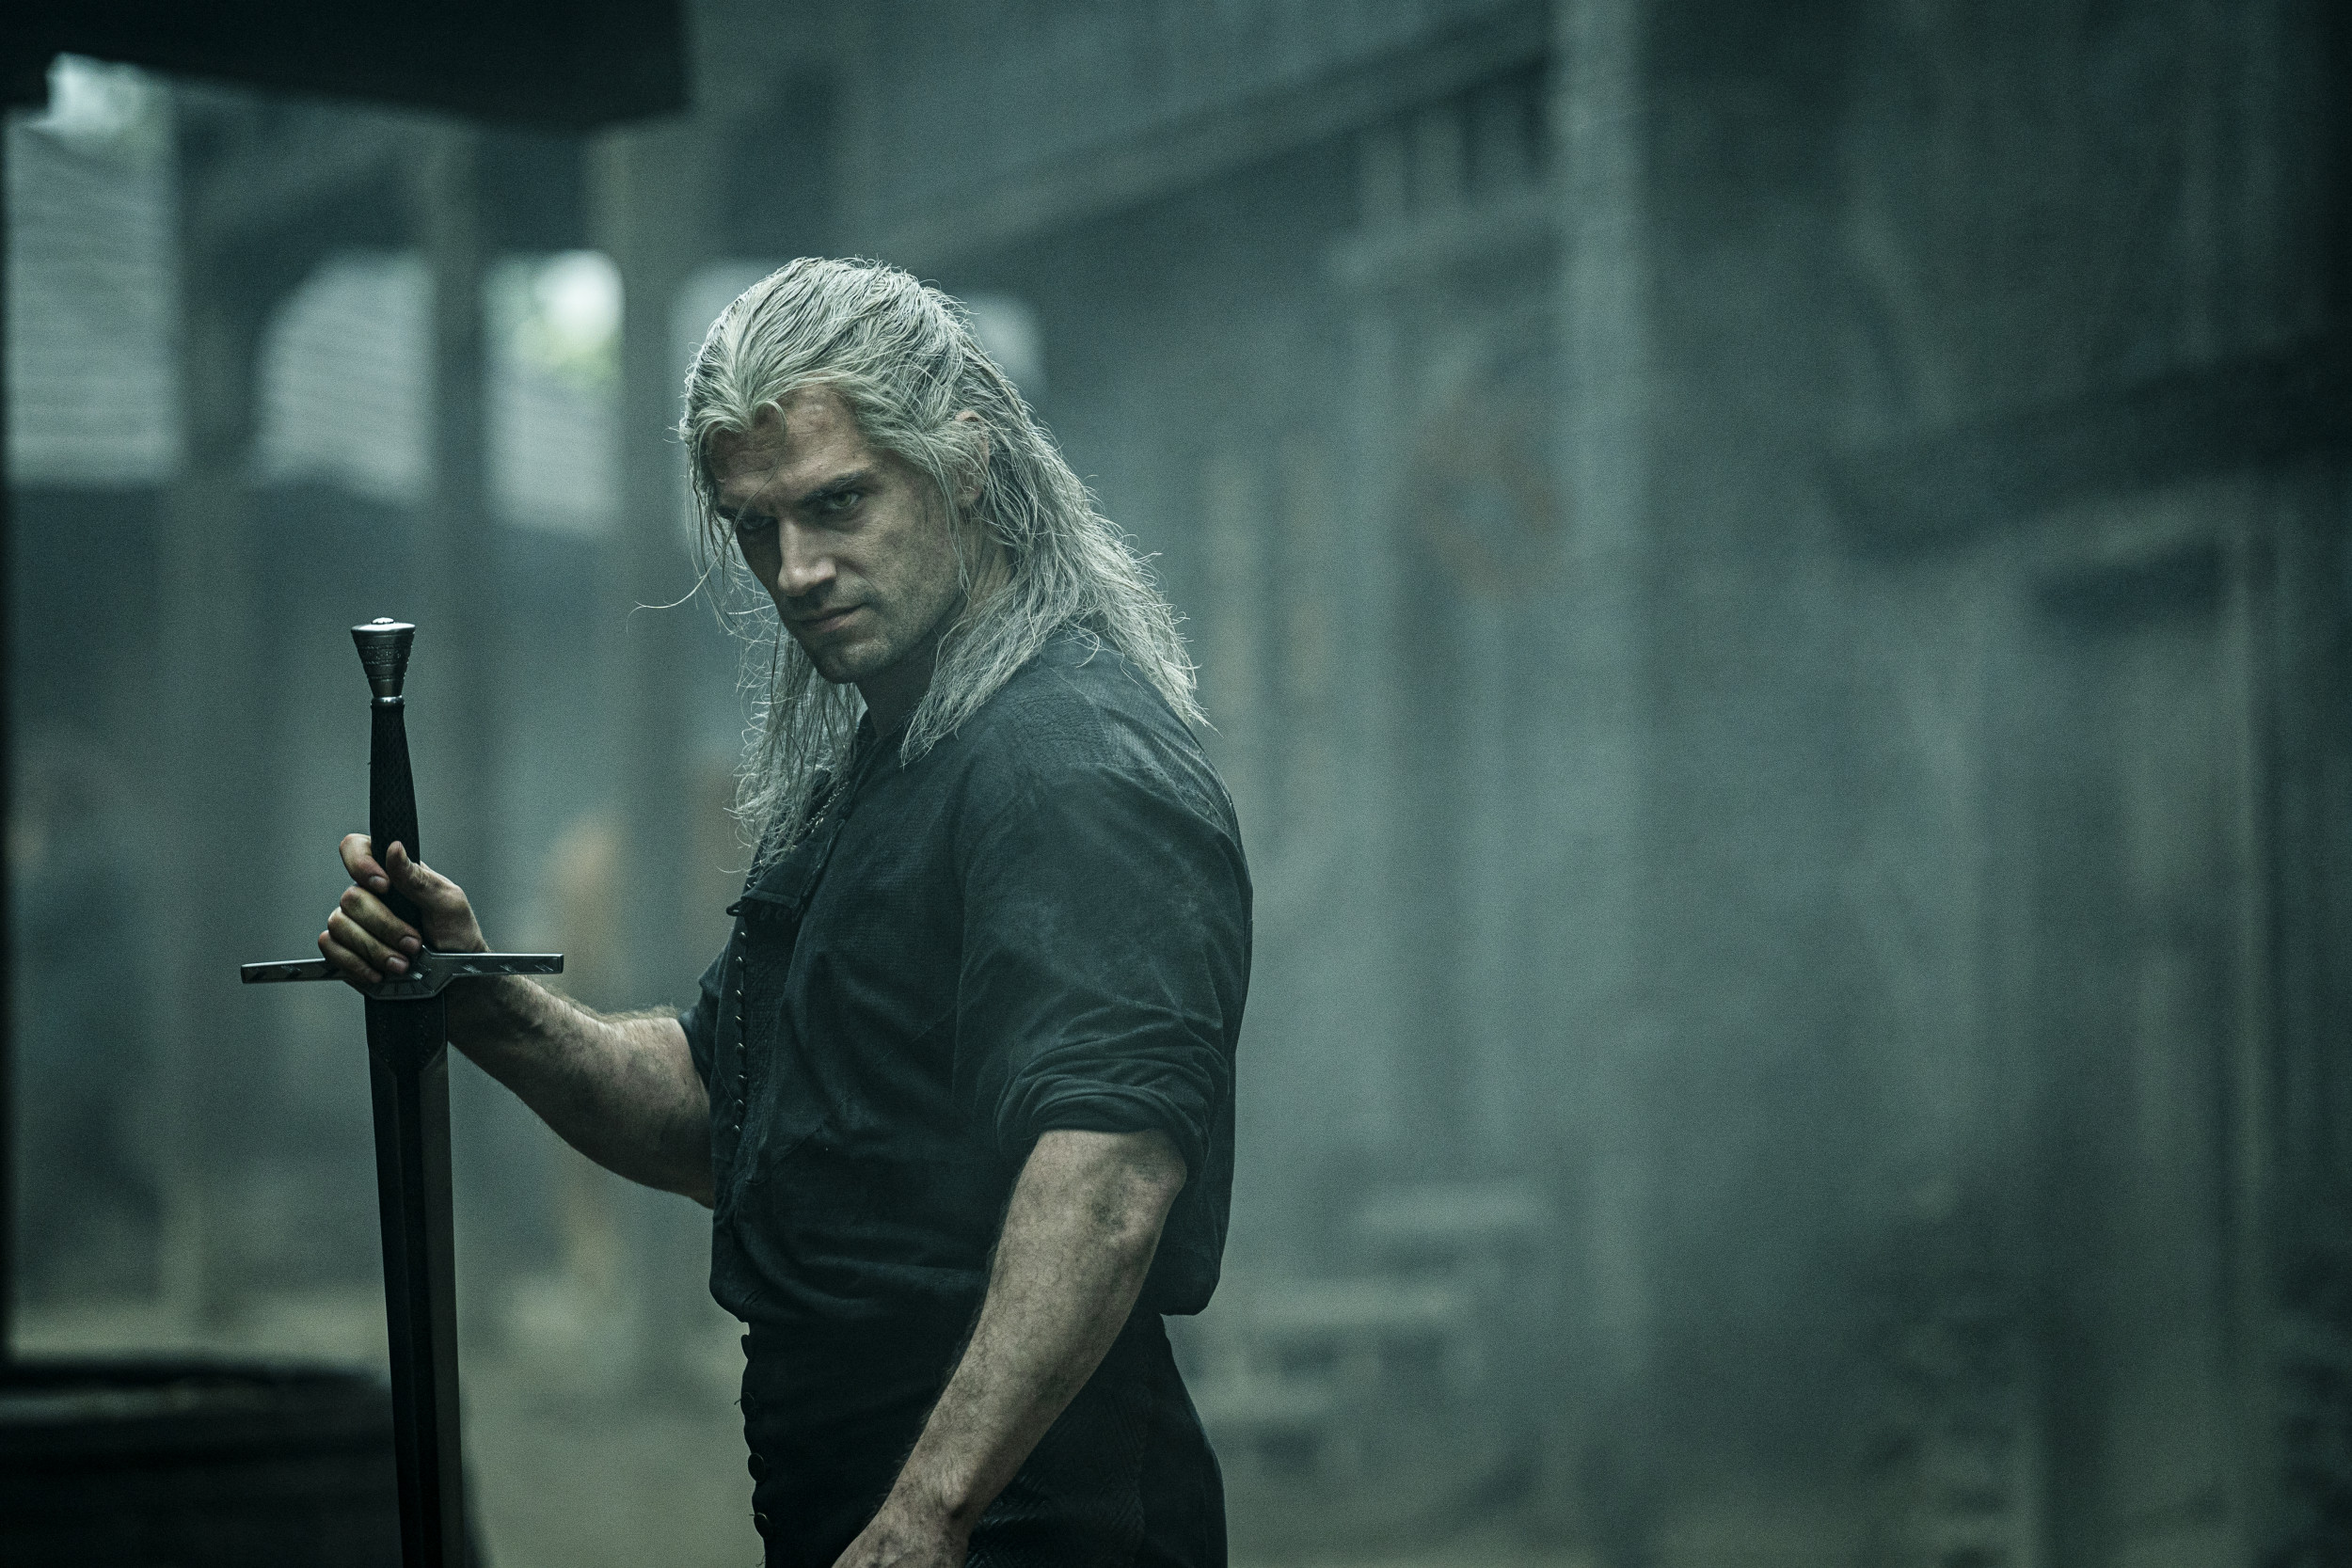 The Witcher' Cast: Who Plays Who in the New Netflix Series?